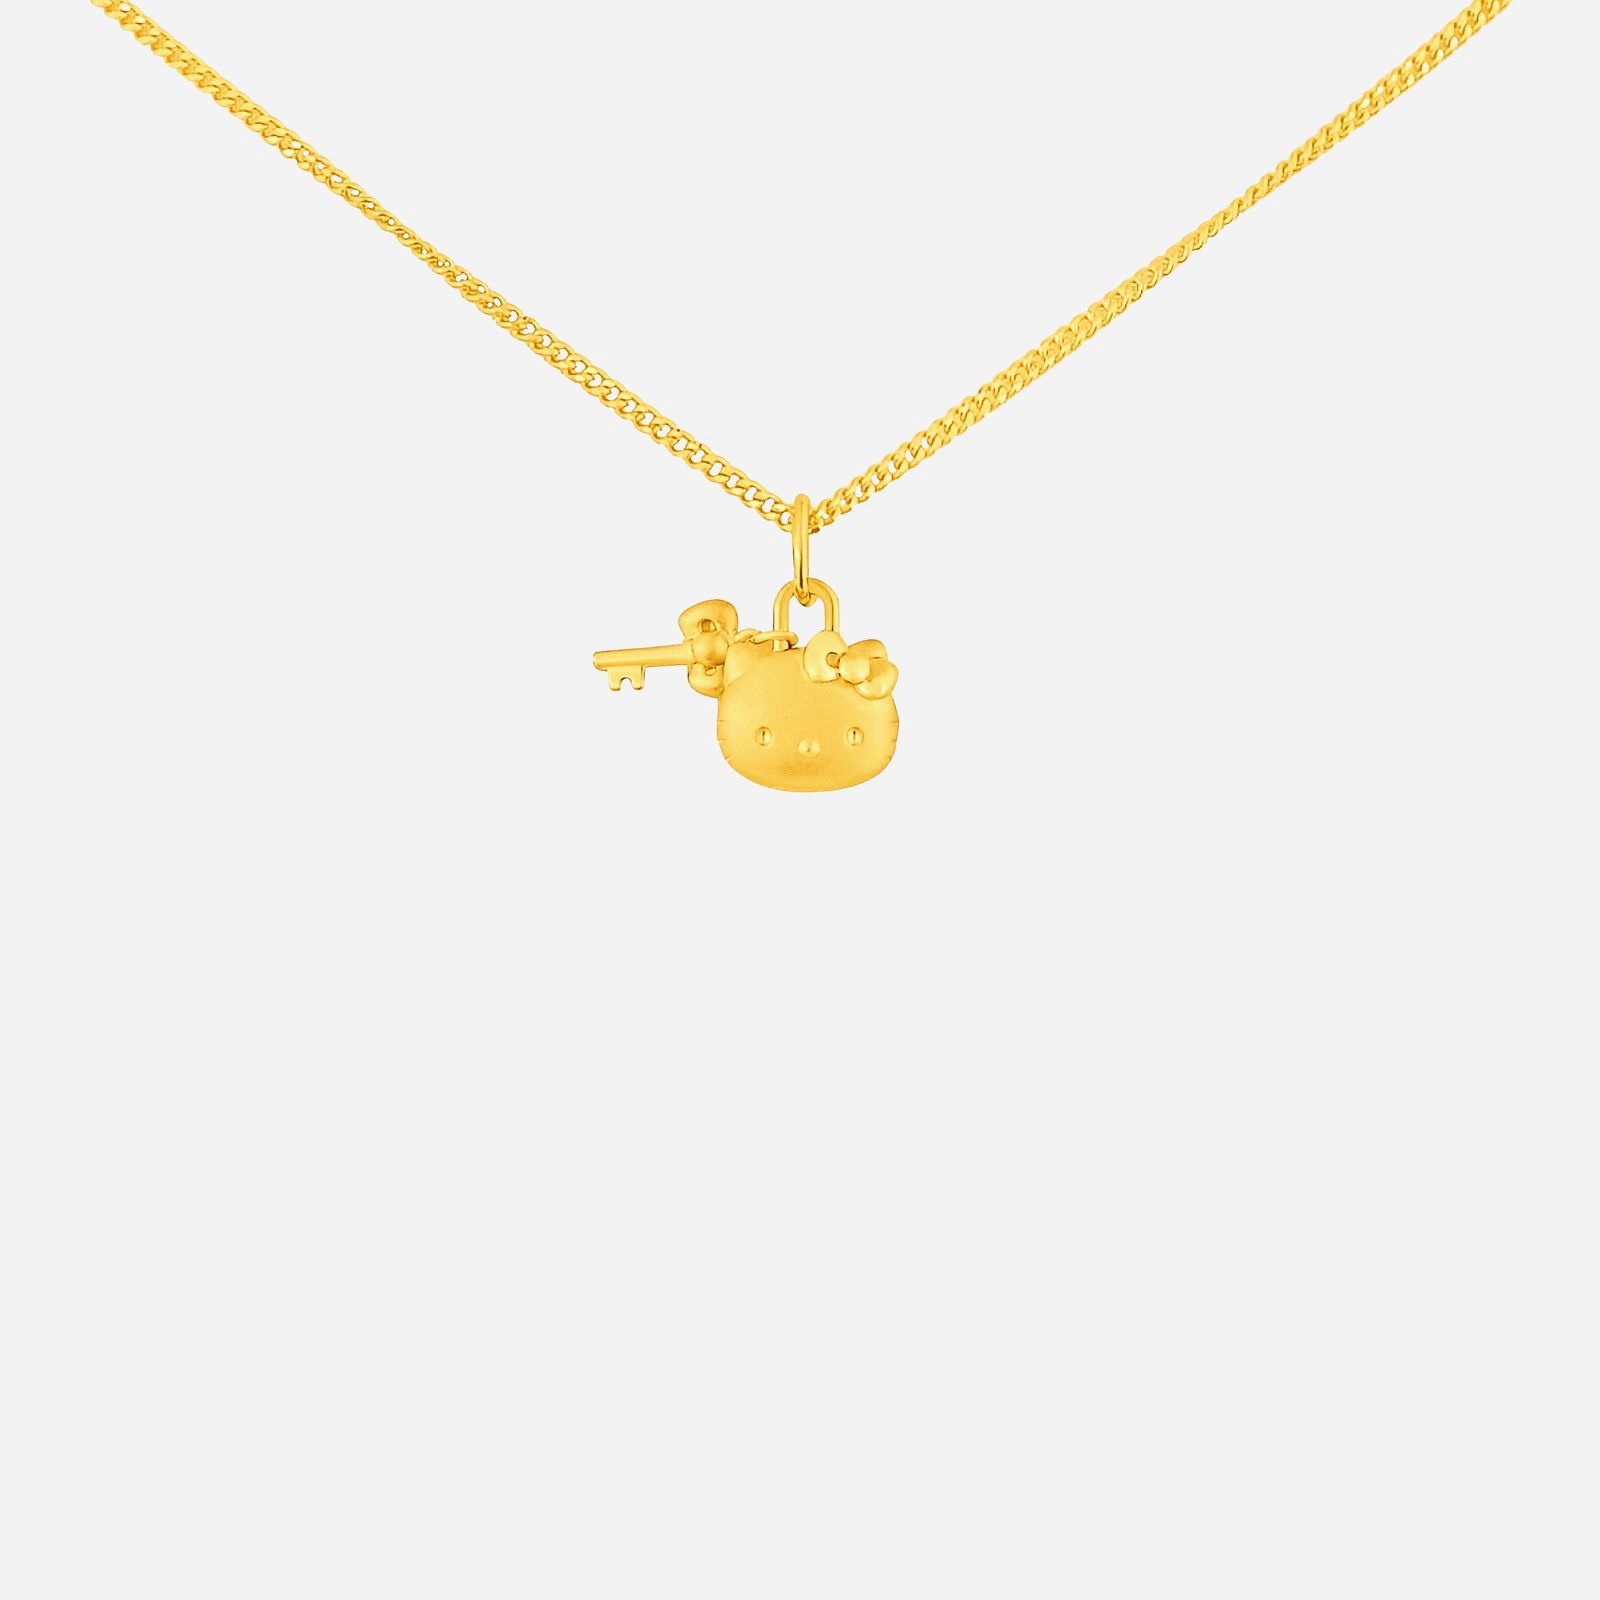 Poh Heng Hello Kitty Lock and Key Pendant in 22K Yellow Gold	